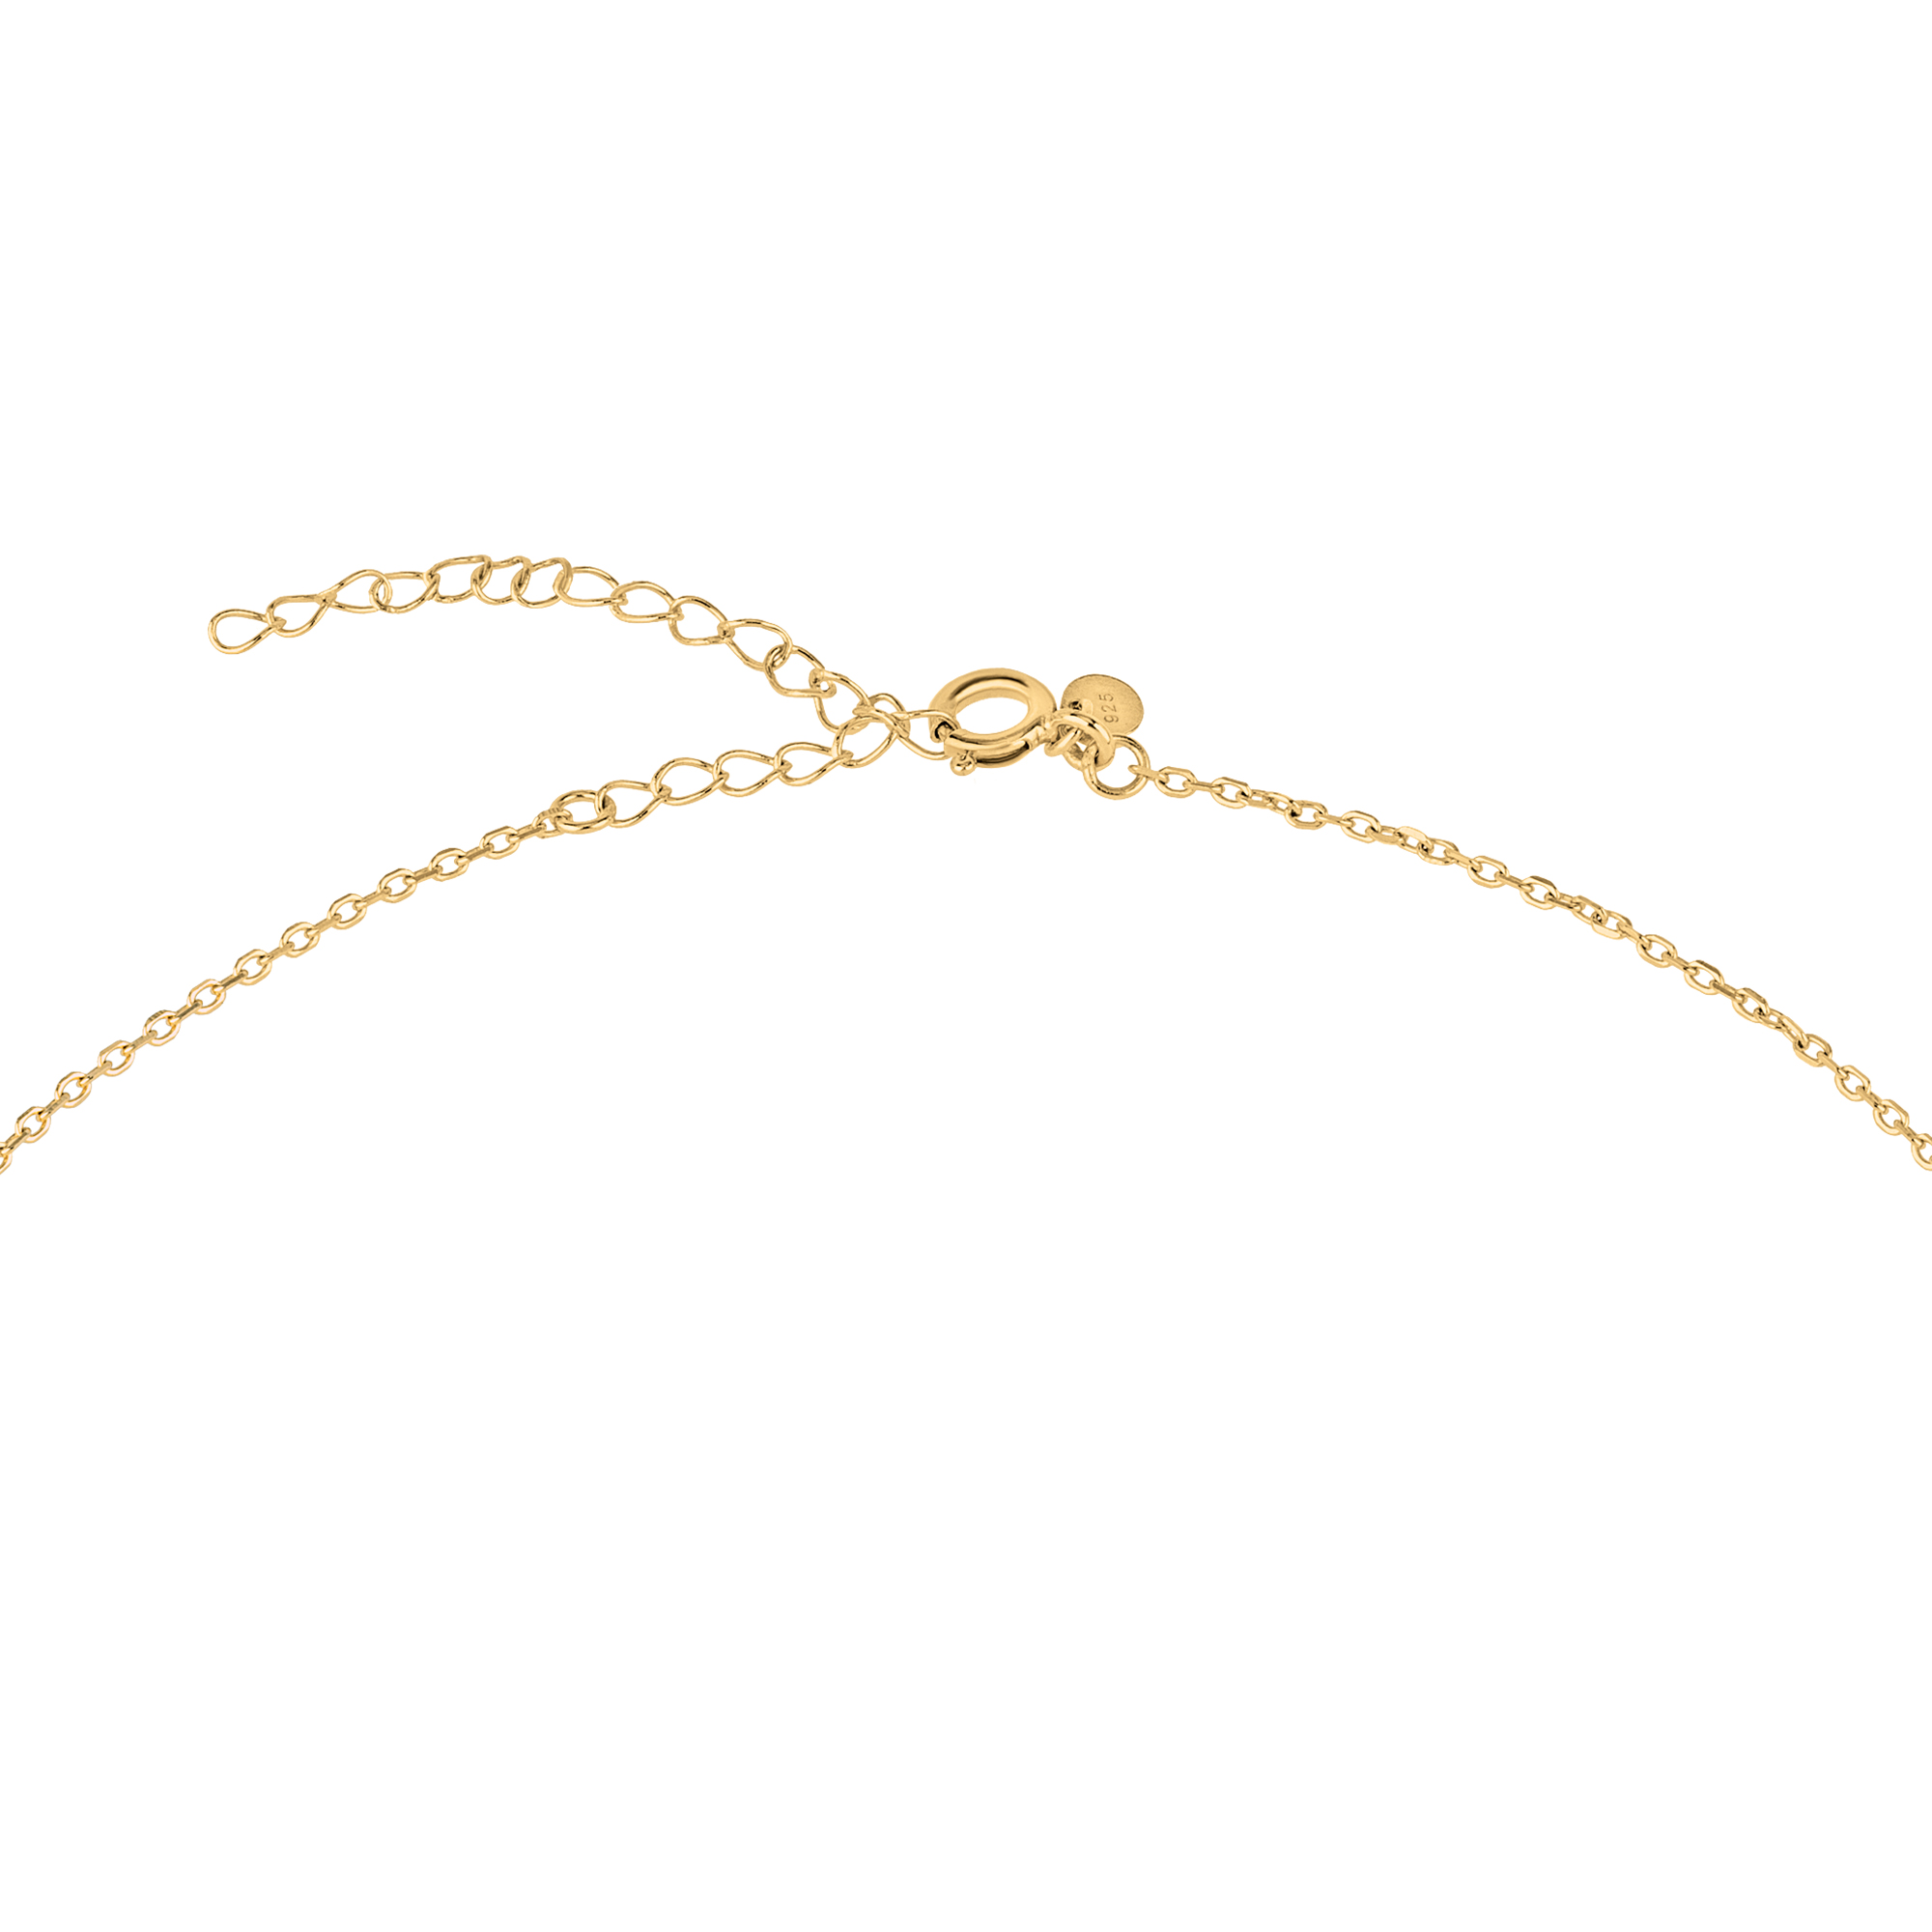 DARLING - 18K GOLD PLATED SILVER CHAIN WITH PENDANT - 3 - TJ3154 | Breil